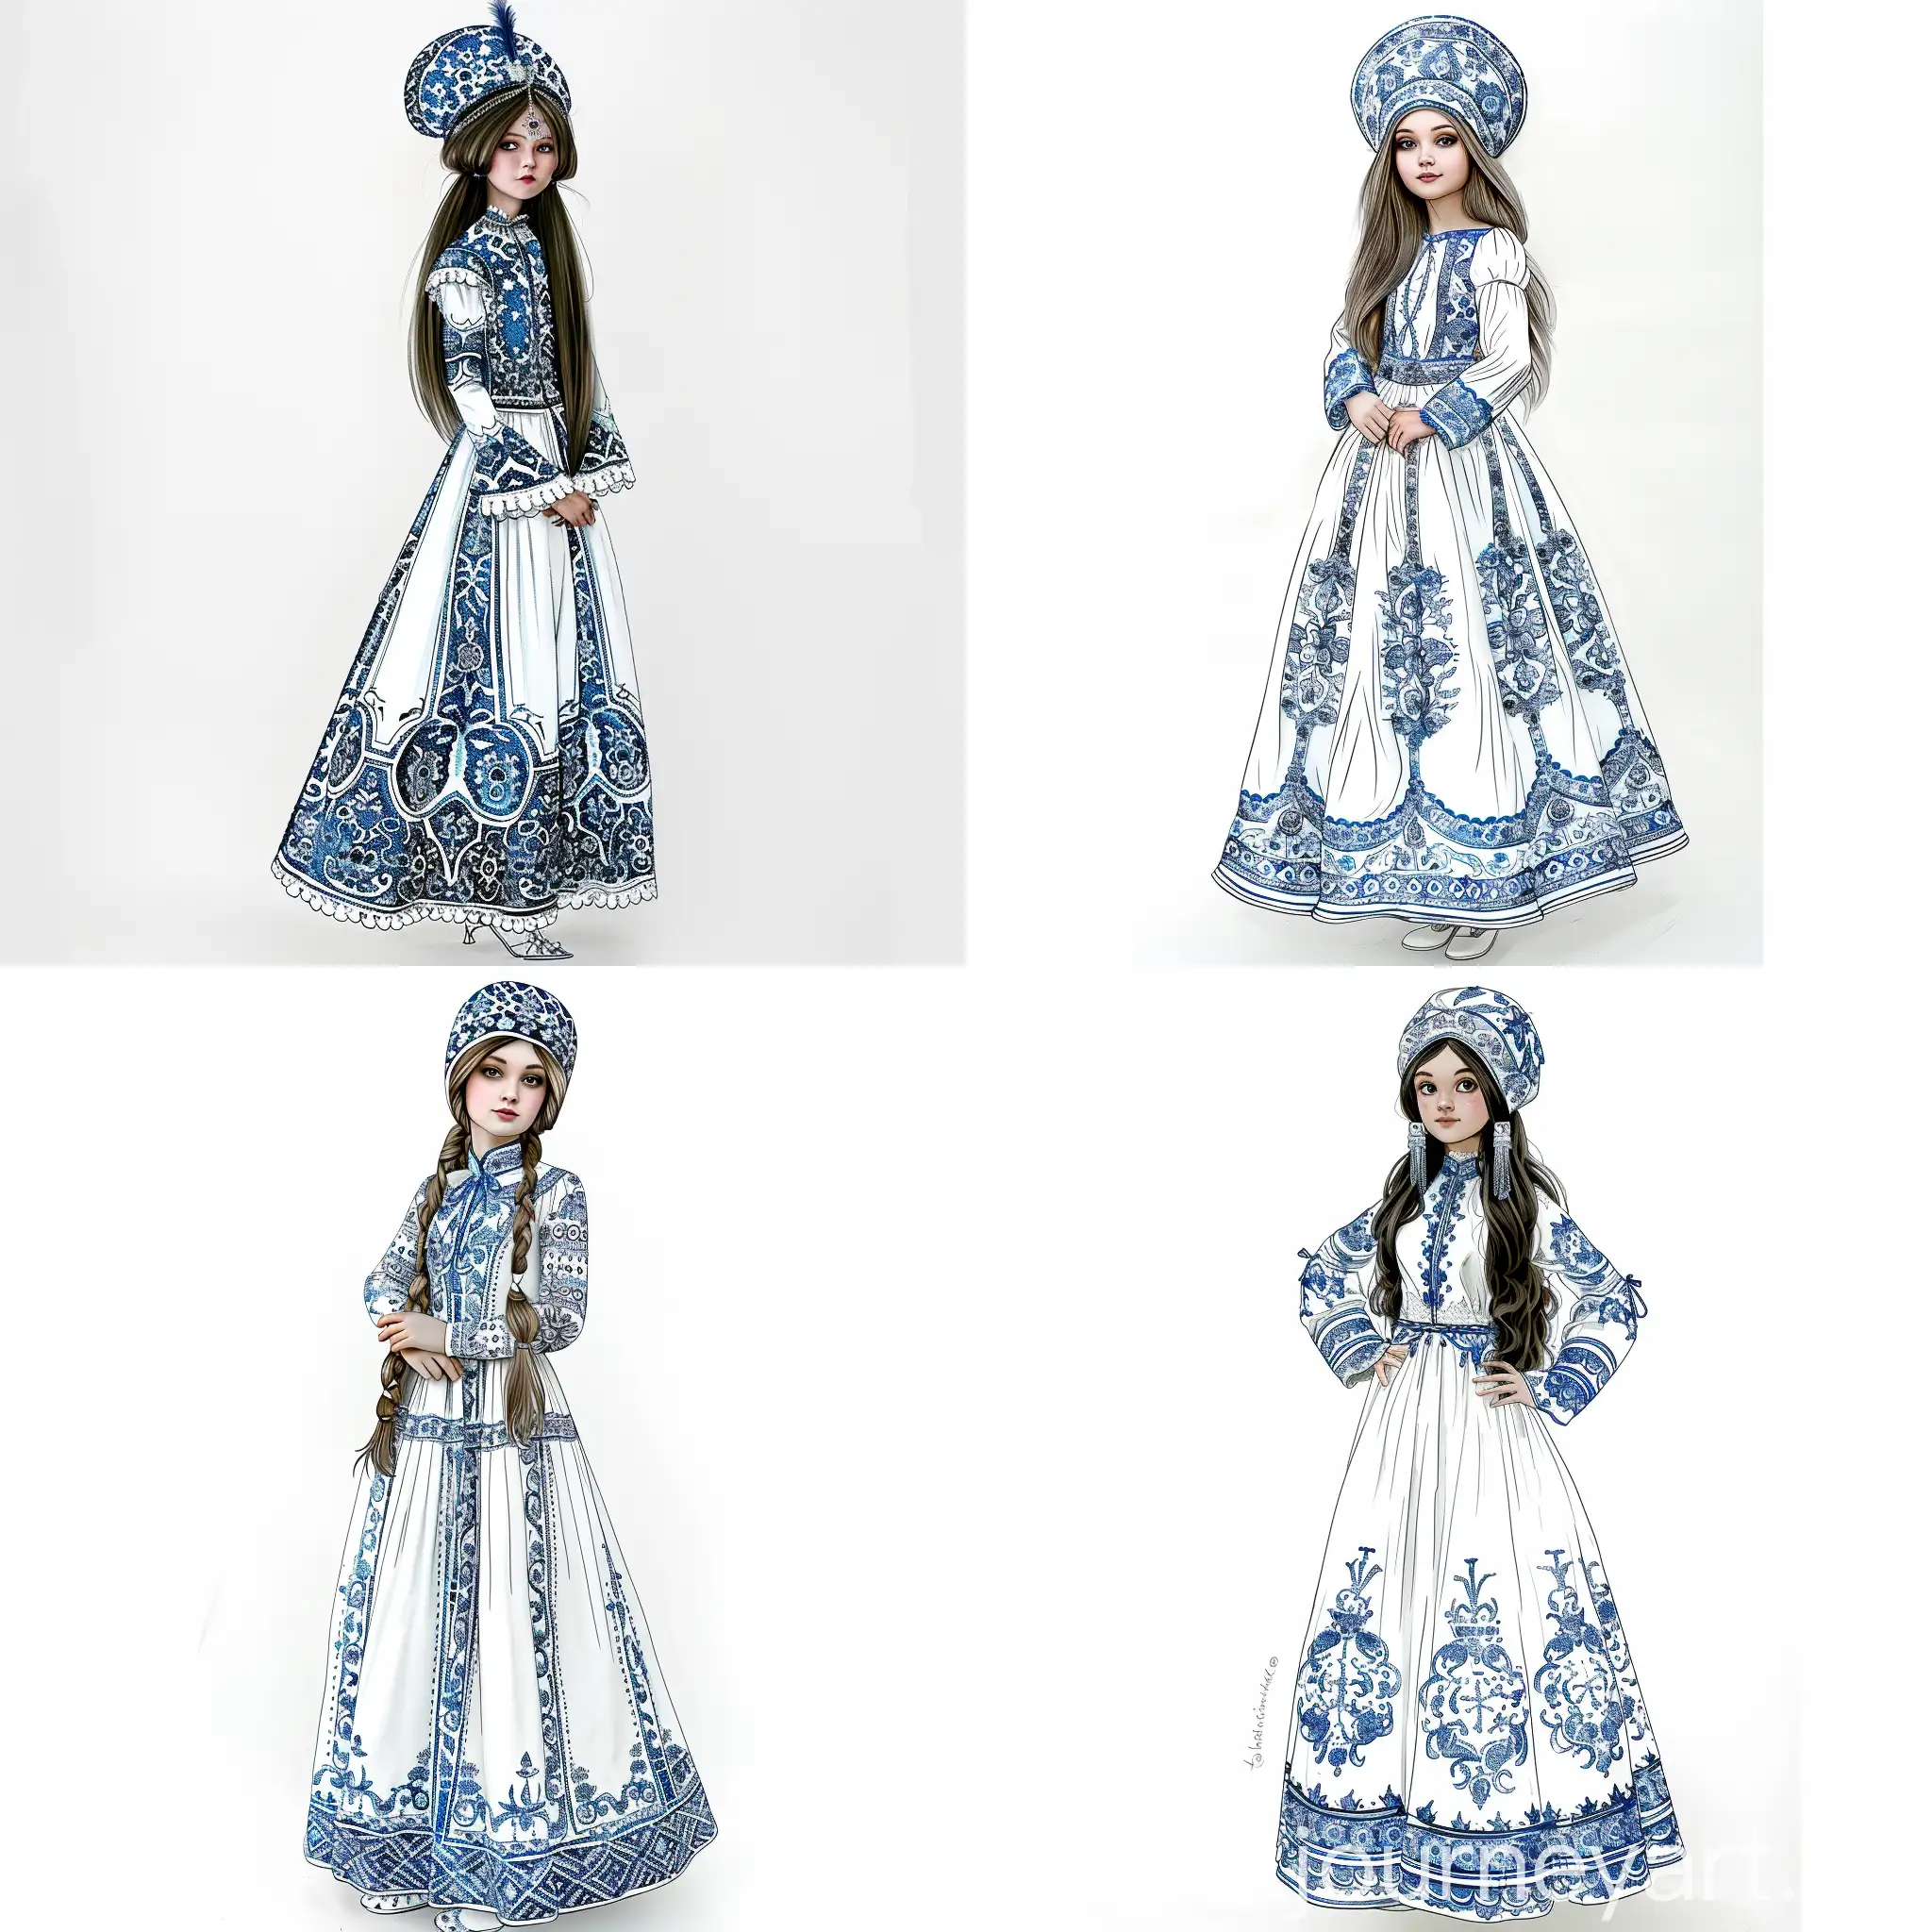 create a girl of Slavic appearance with a kokoshnik on her head and long hair, she is wearing a long floor-length dress, decorated with Gzhel patterns